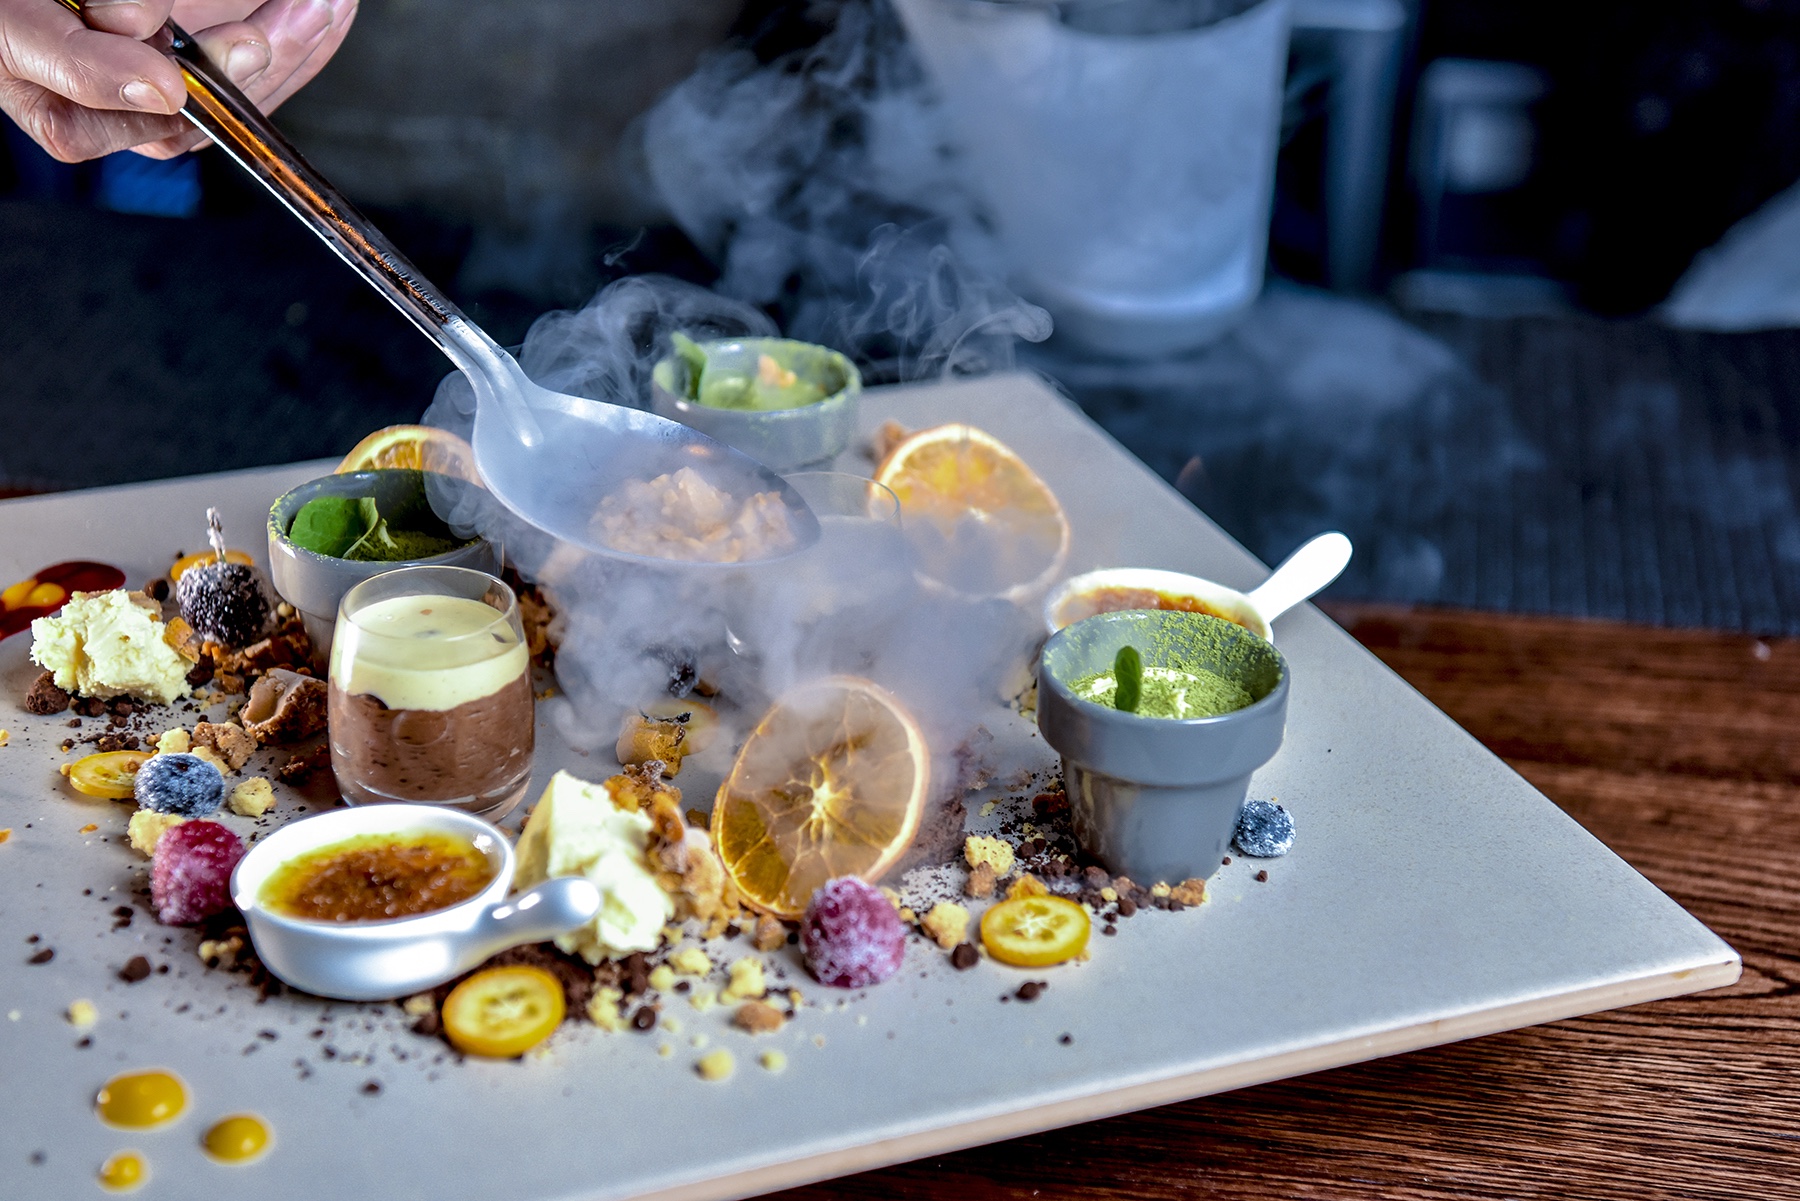 'Fire and Ice' dessert platter. Image: Supplied